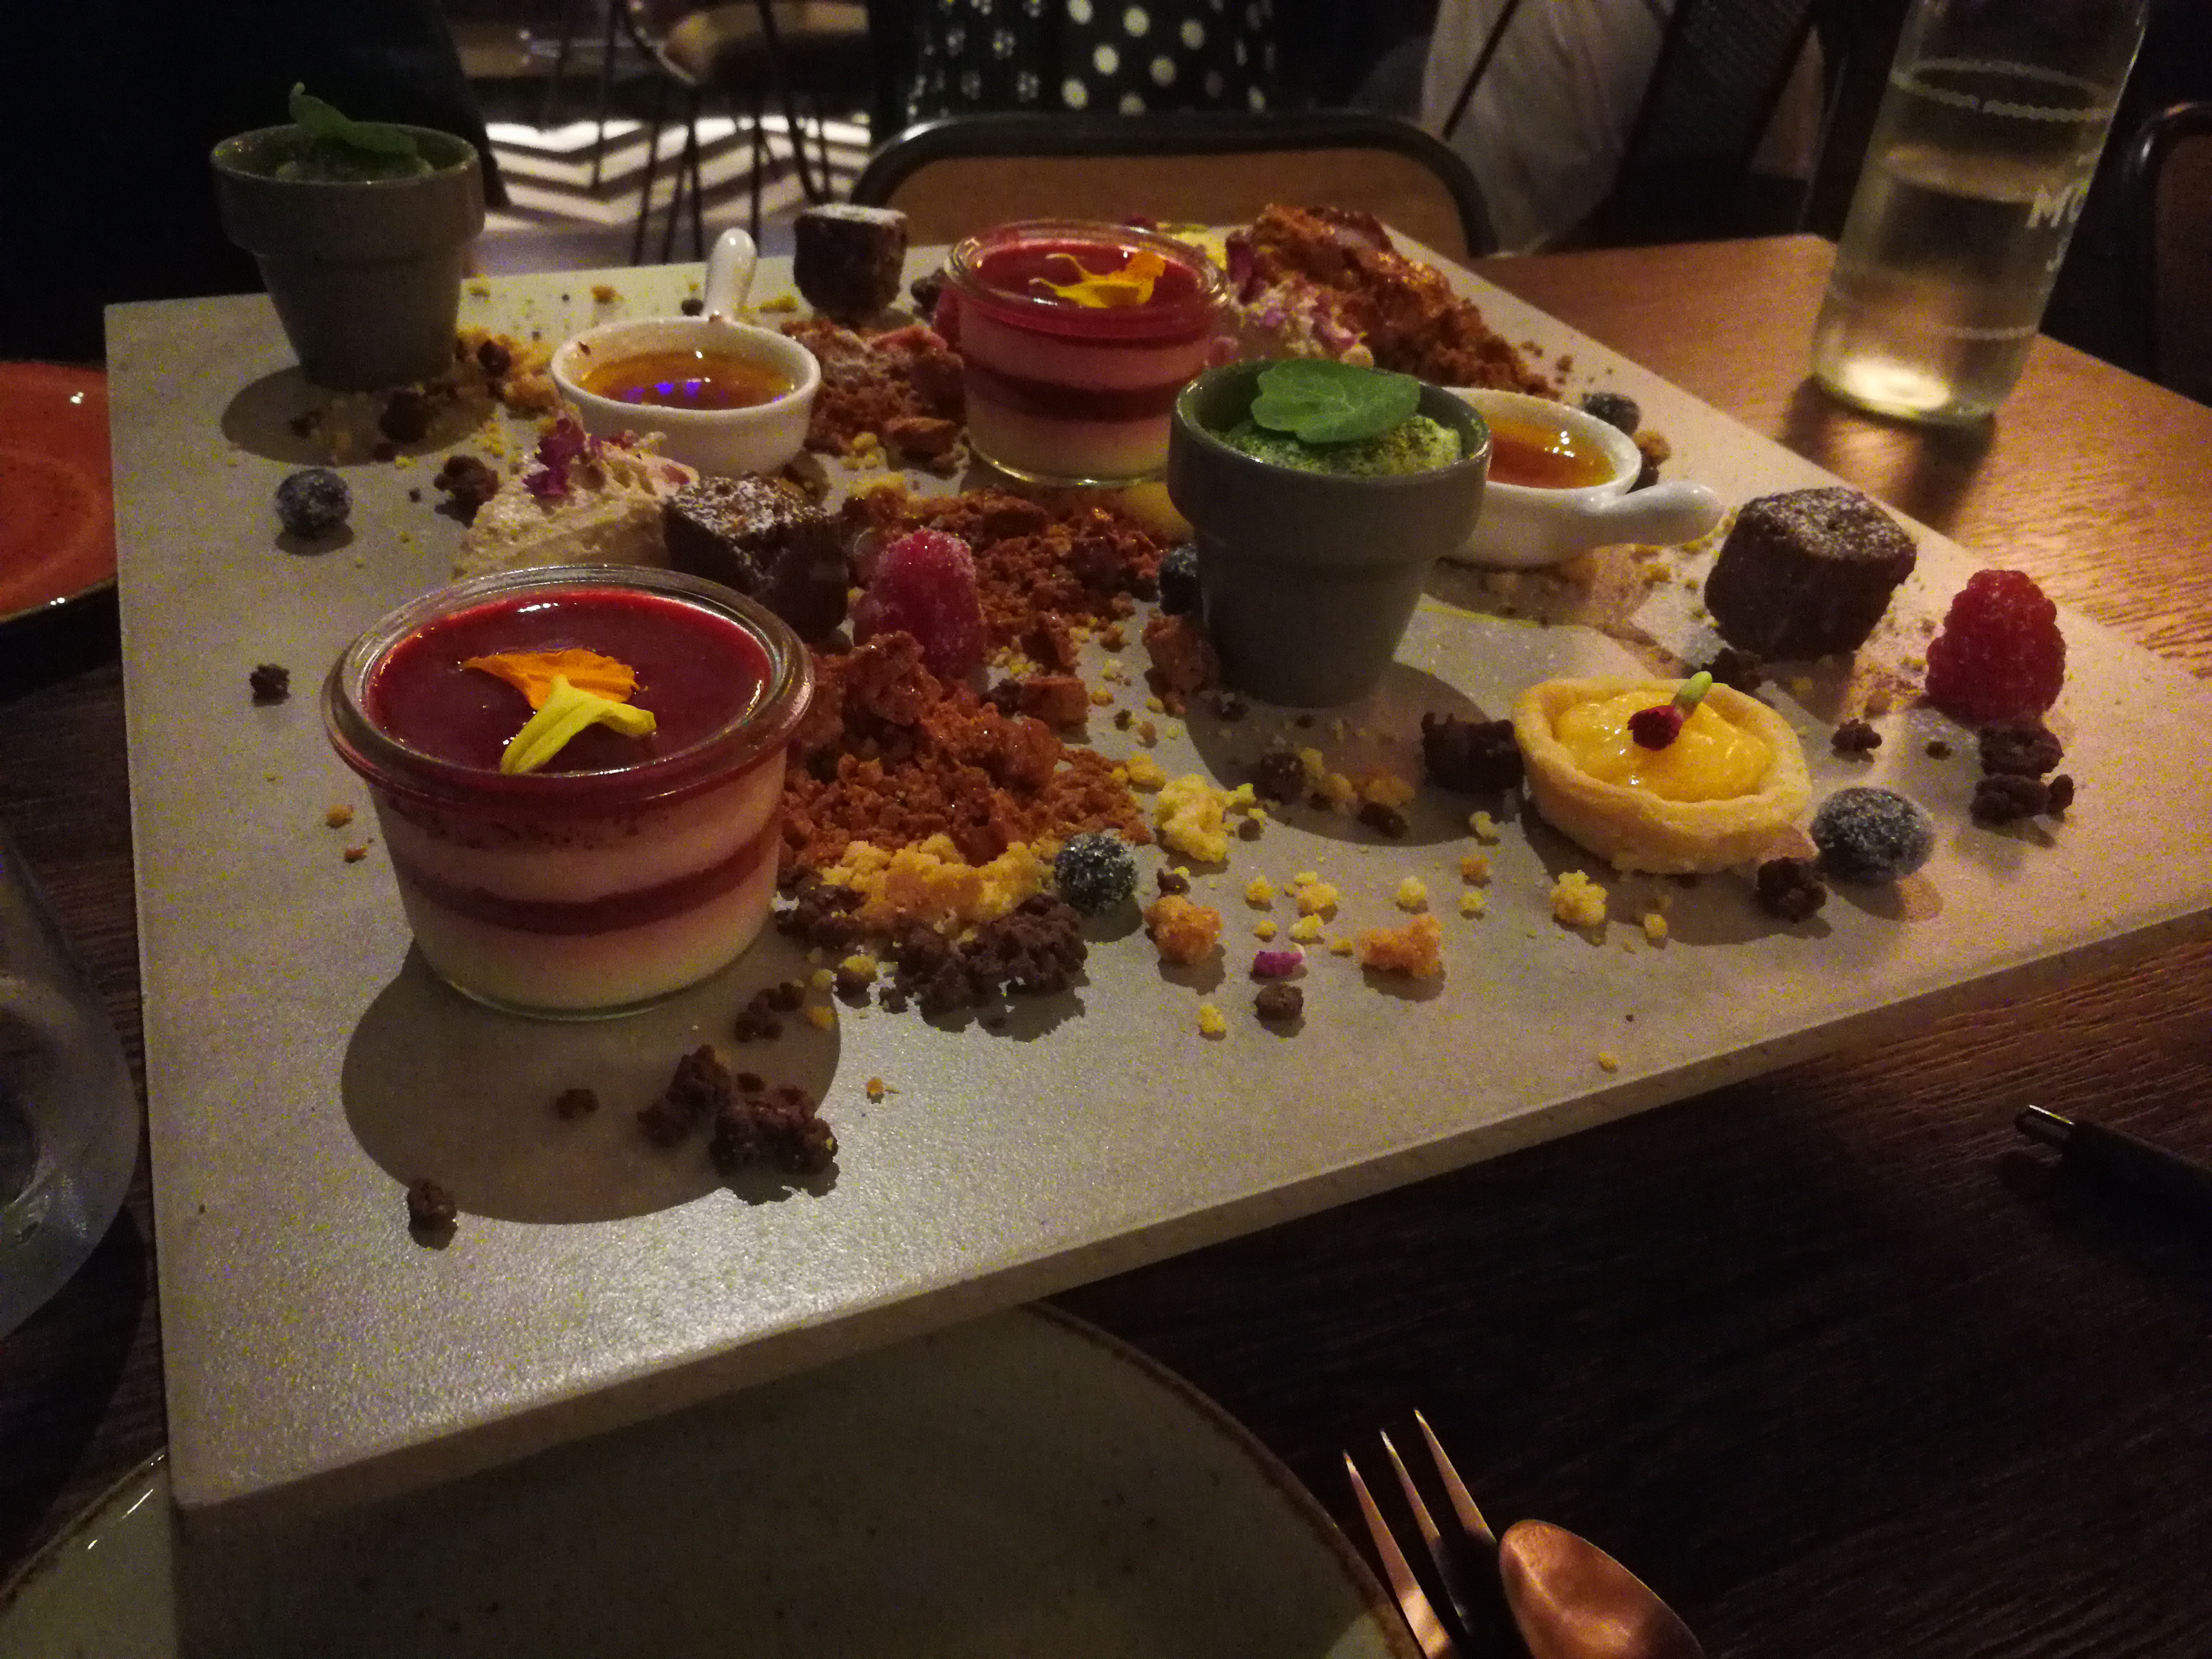 Our 'Fire and Ice' dessert platter. Image: Christopher Kelly